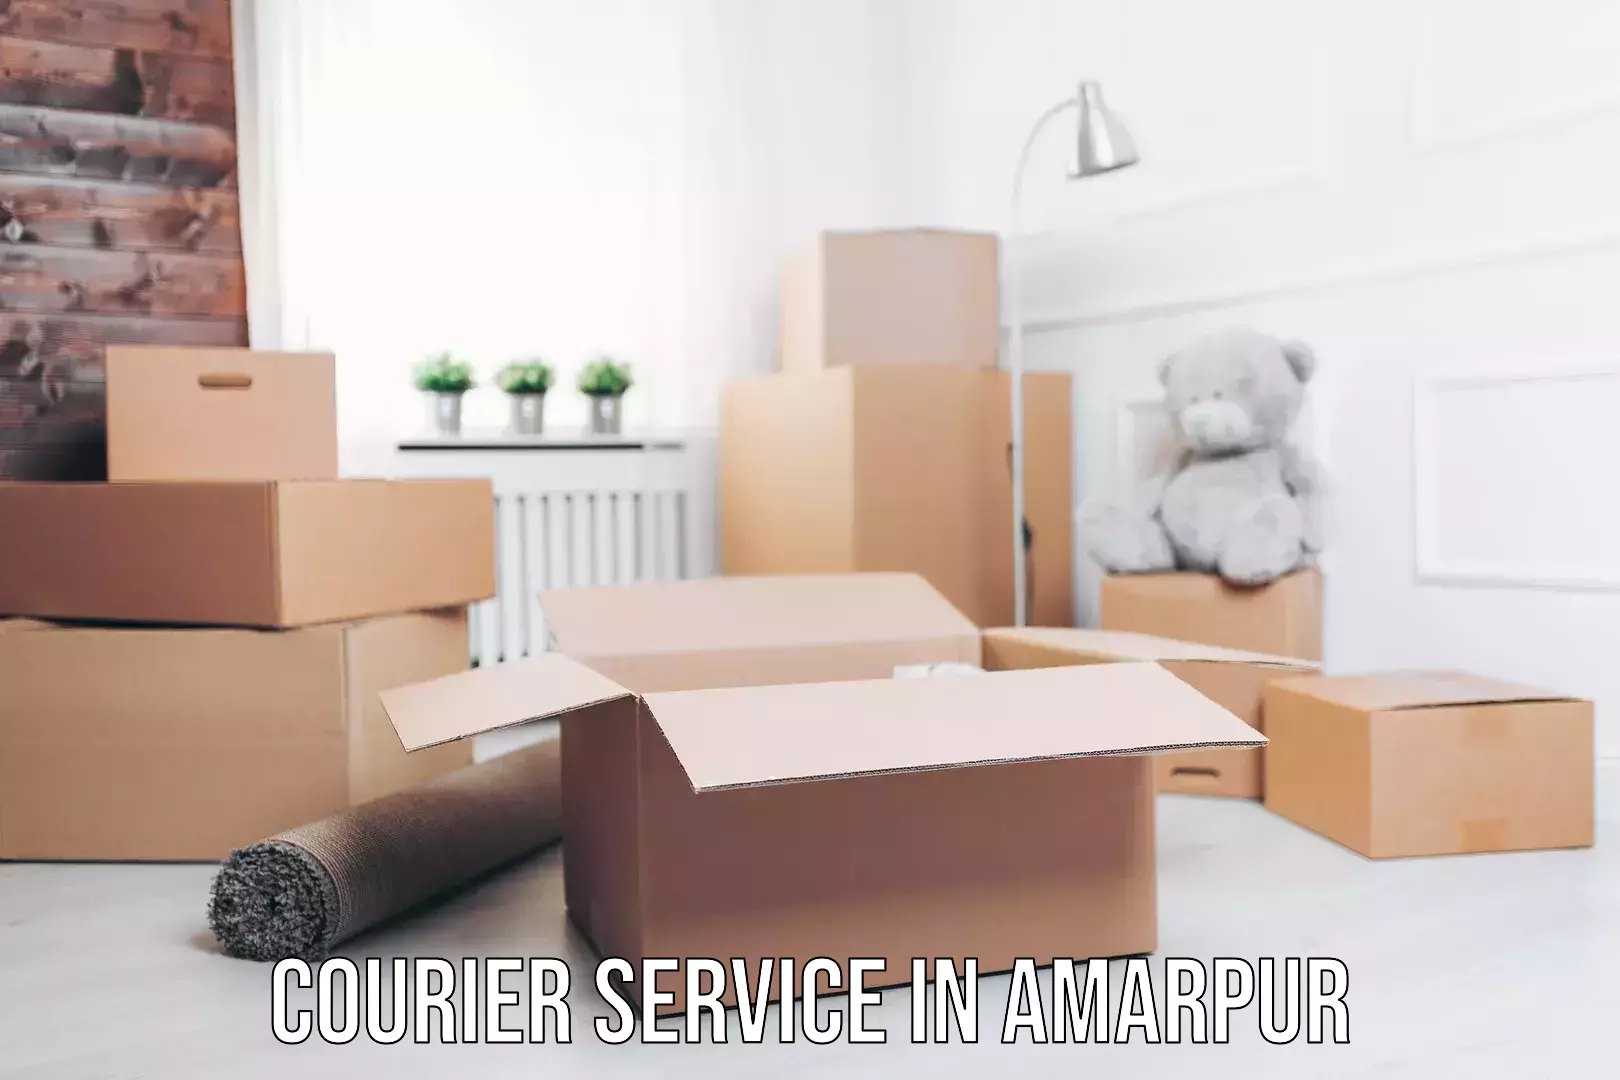 State-of-the-art courier technology in Amarpur